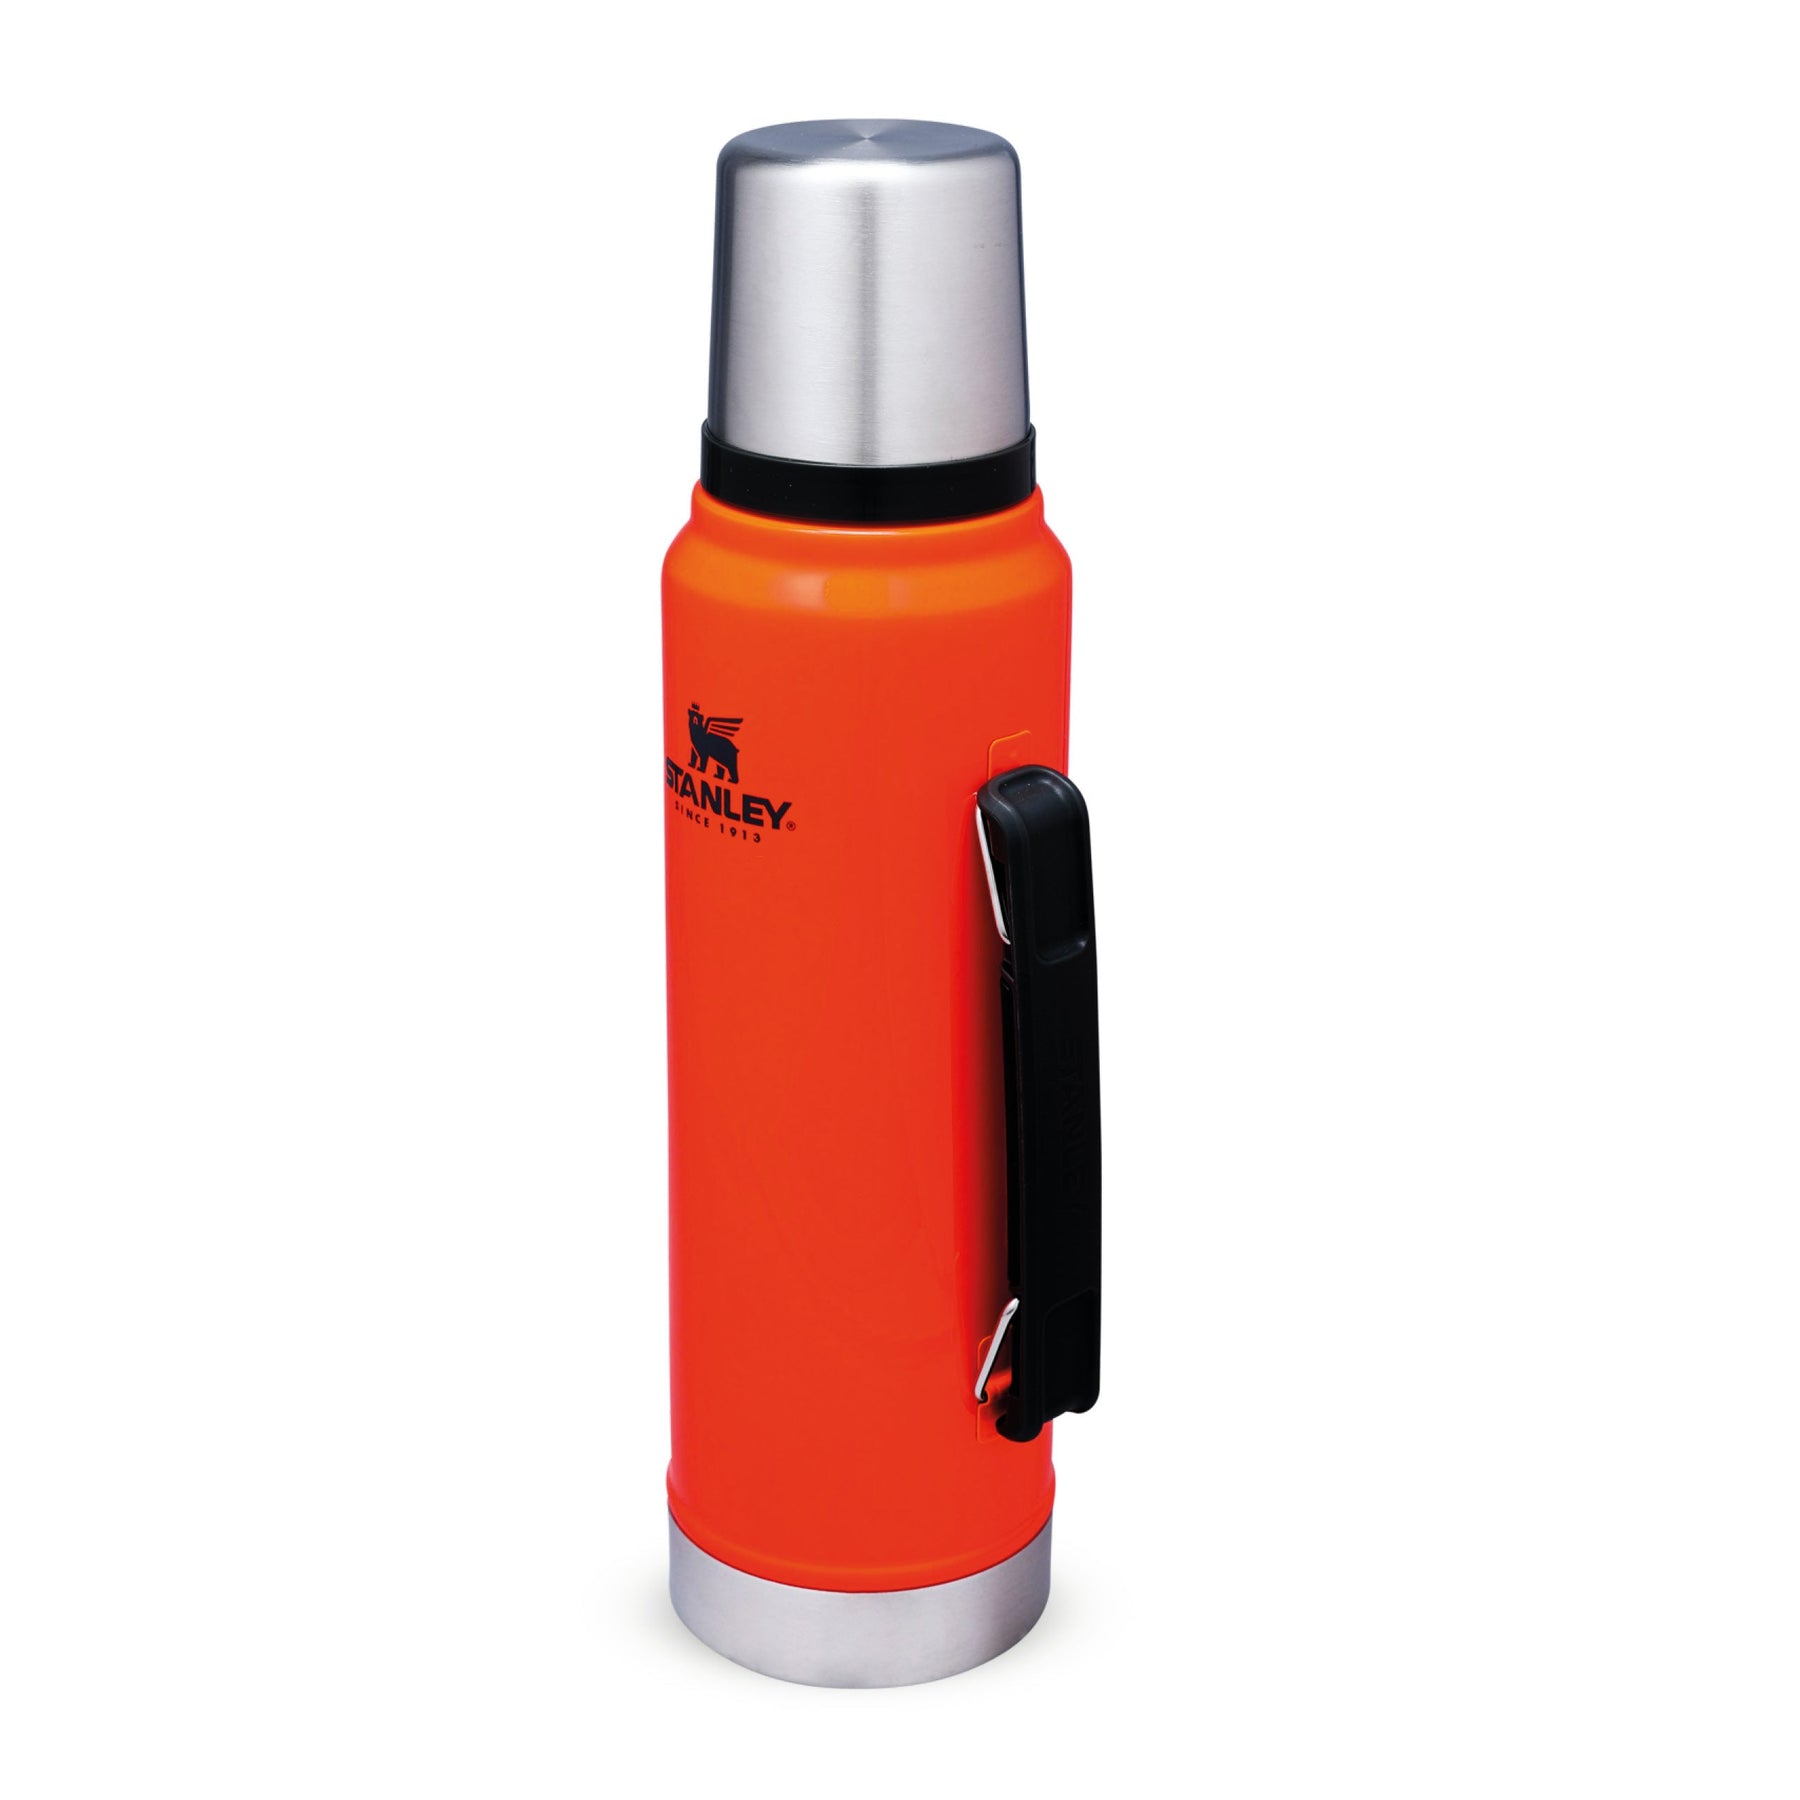 Stanley Vacuum Insulated Wide Mouth Bottle bright orange 1.5QT